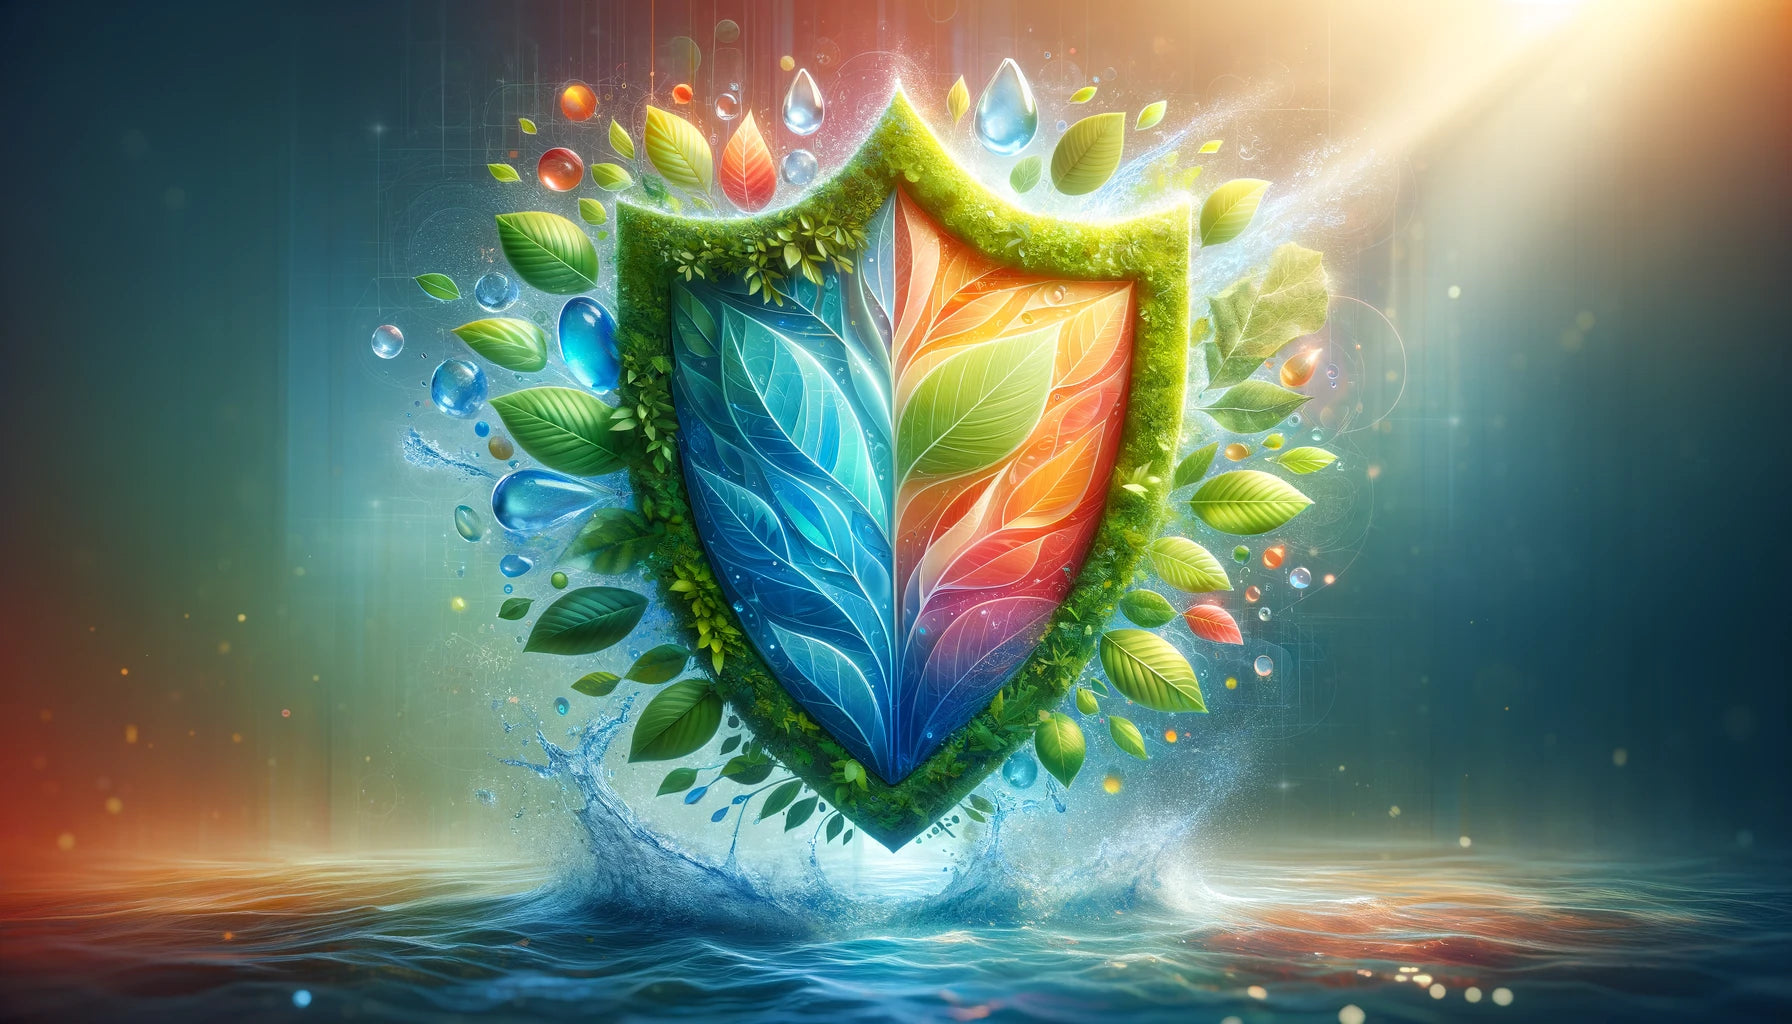 A conceptual illustration of a strong and healthy skin barrier represented by a vibrant shield made of natural elements